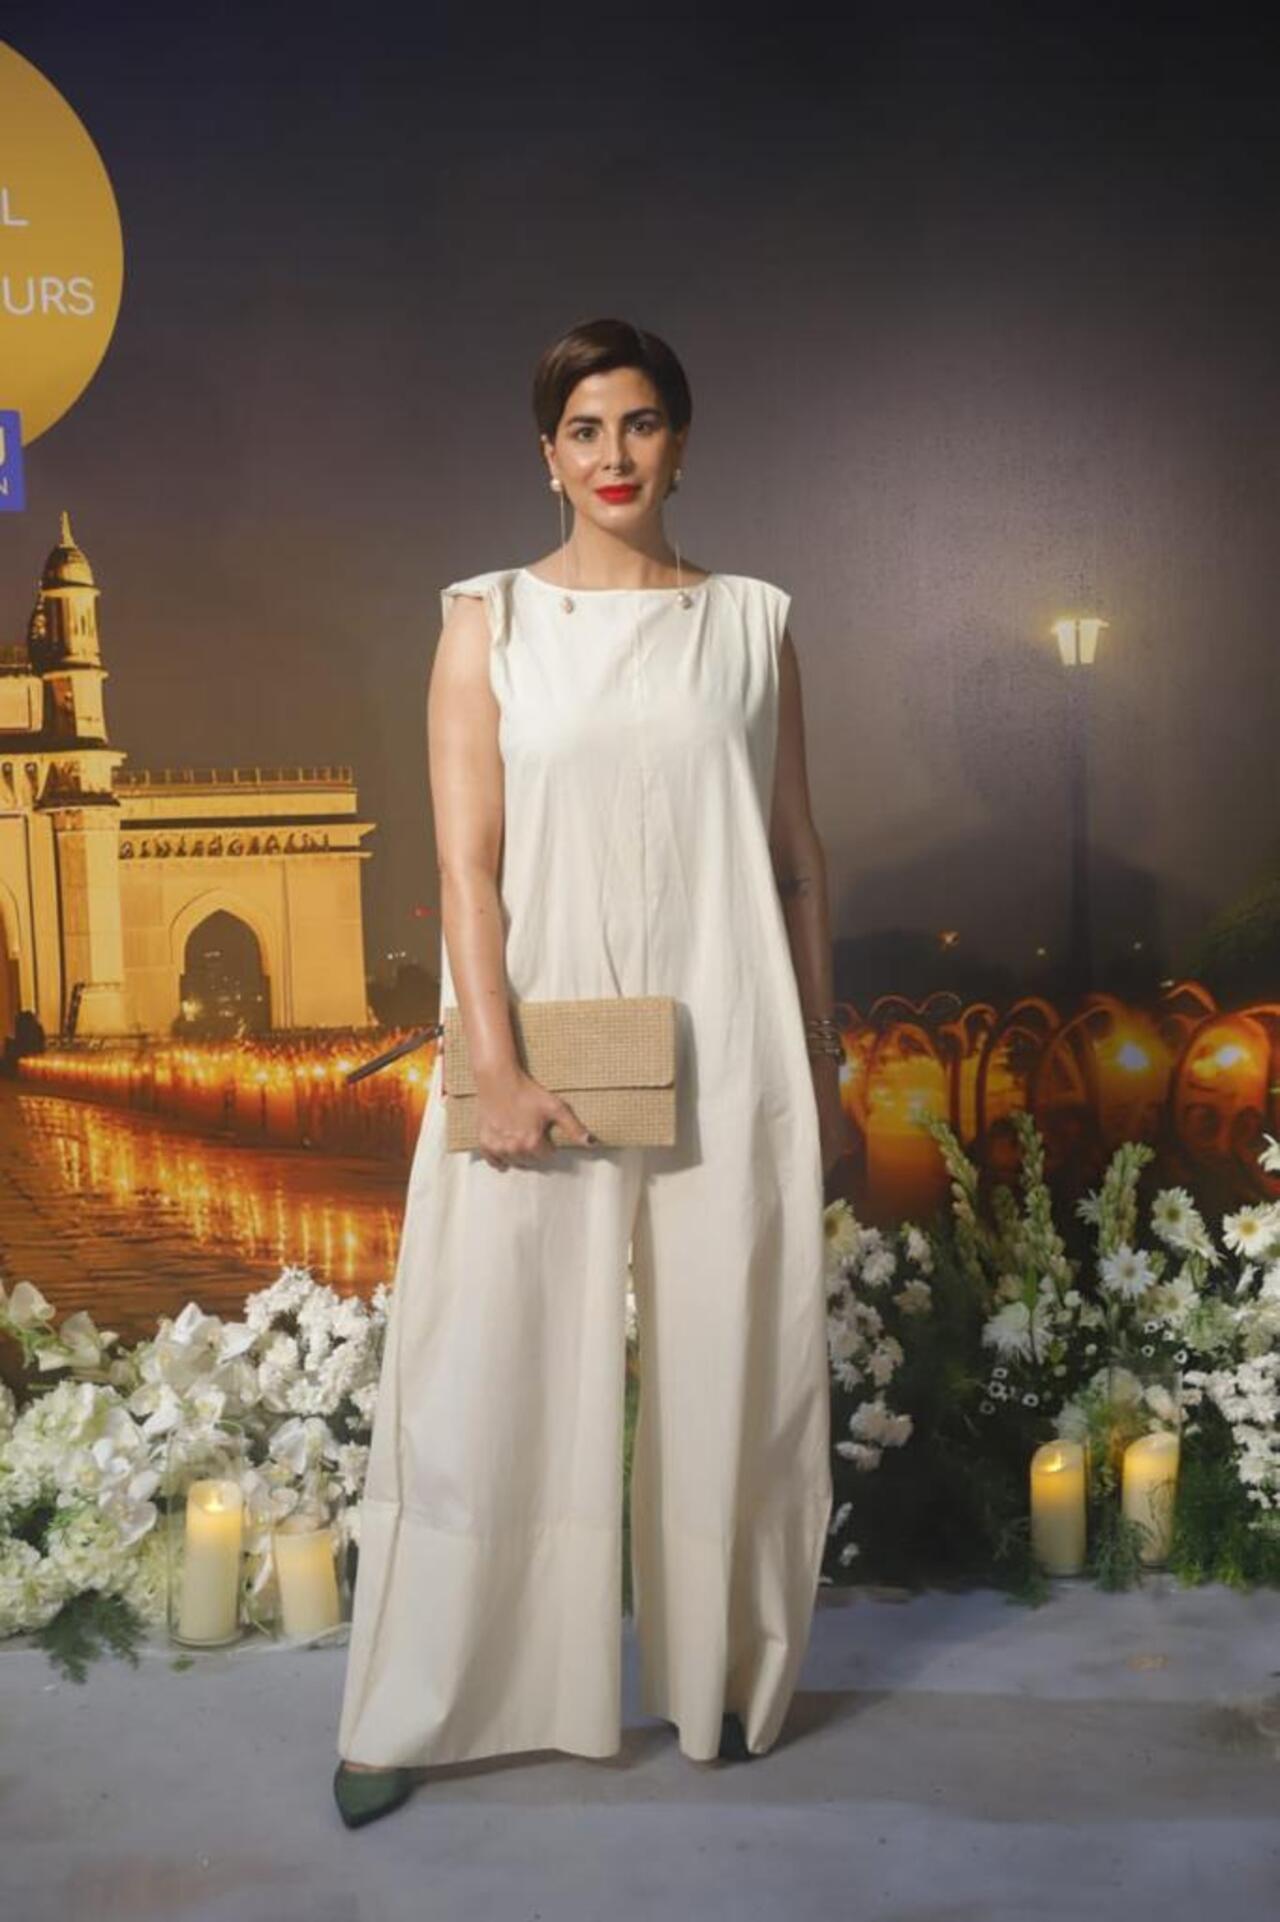 Kirti Kulhari opted for an all-white traditional anarkali suit for the occasion